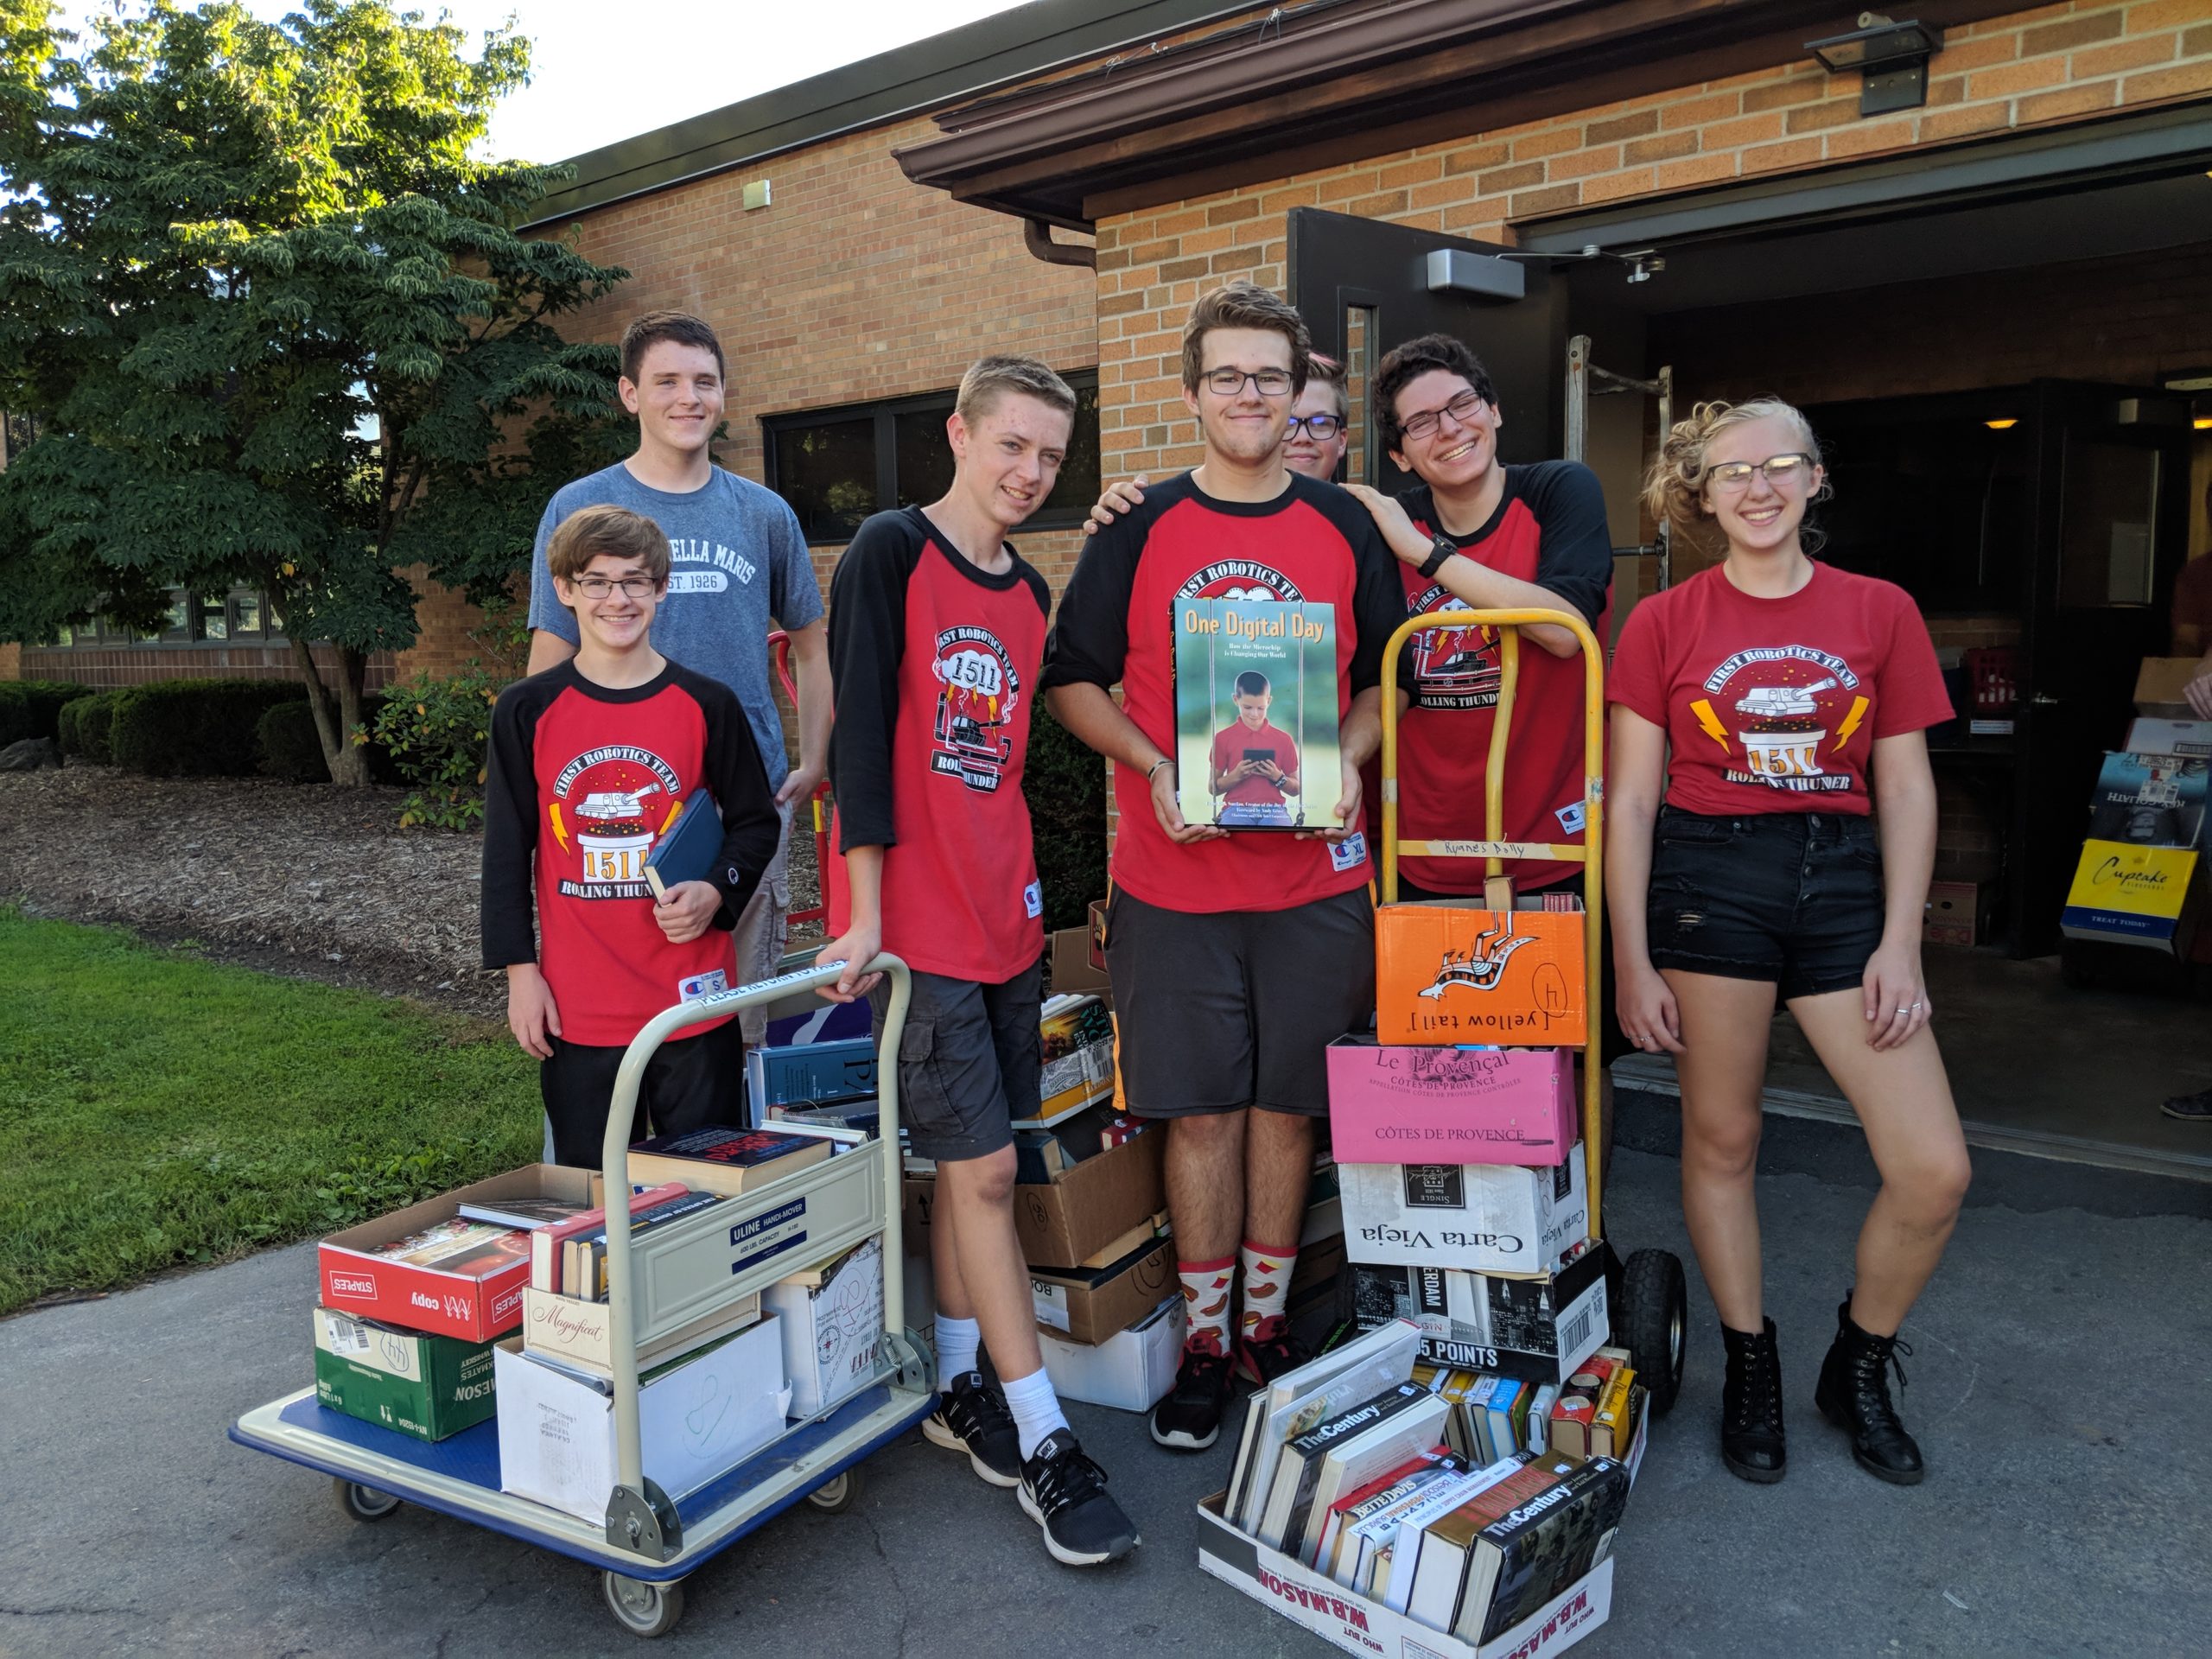 Team members with boxes of books on carts helping cleanup at the Penfield Library Booksale